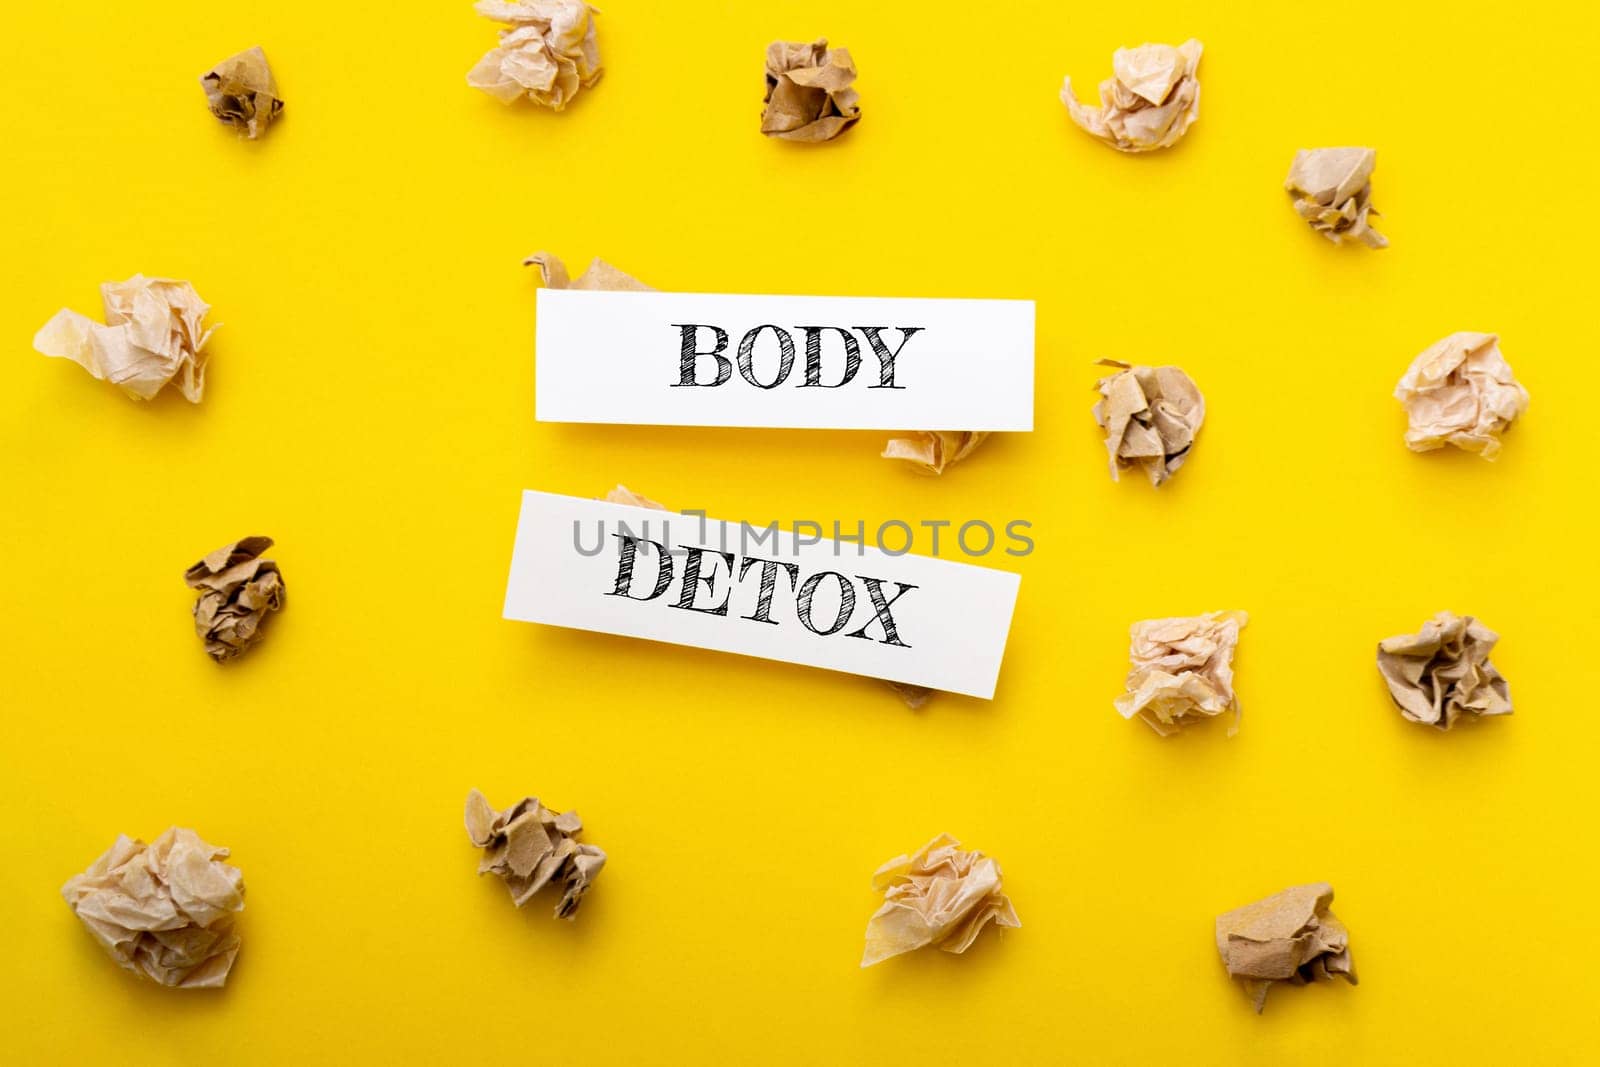 Two pieces of paper with the words body detox written on them. The paper is placed on top of a yellow background, which is covered in crumpled paper. Scene is somewhat chaotic